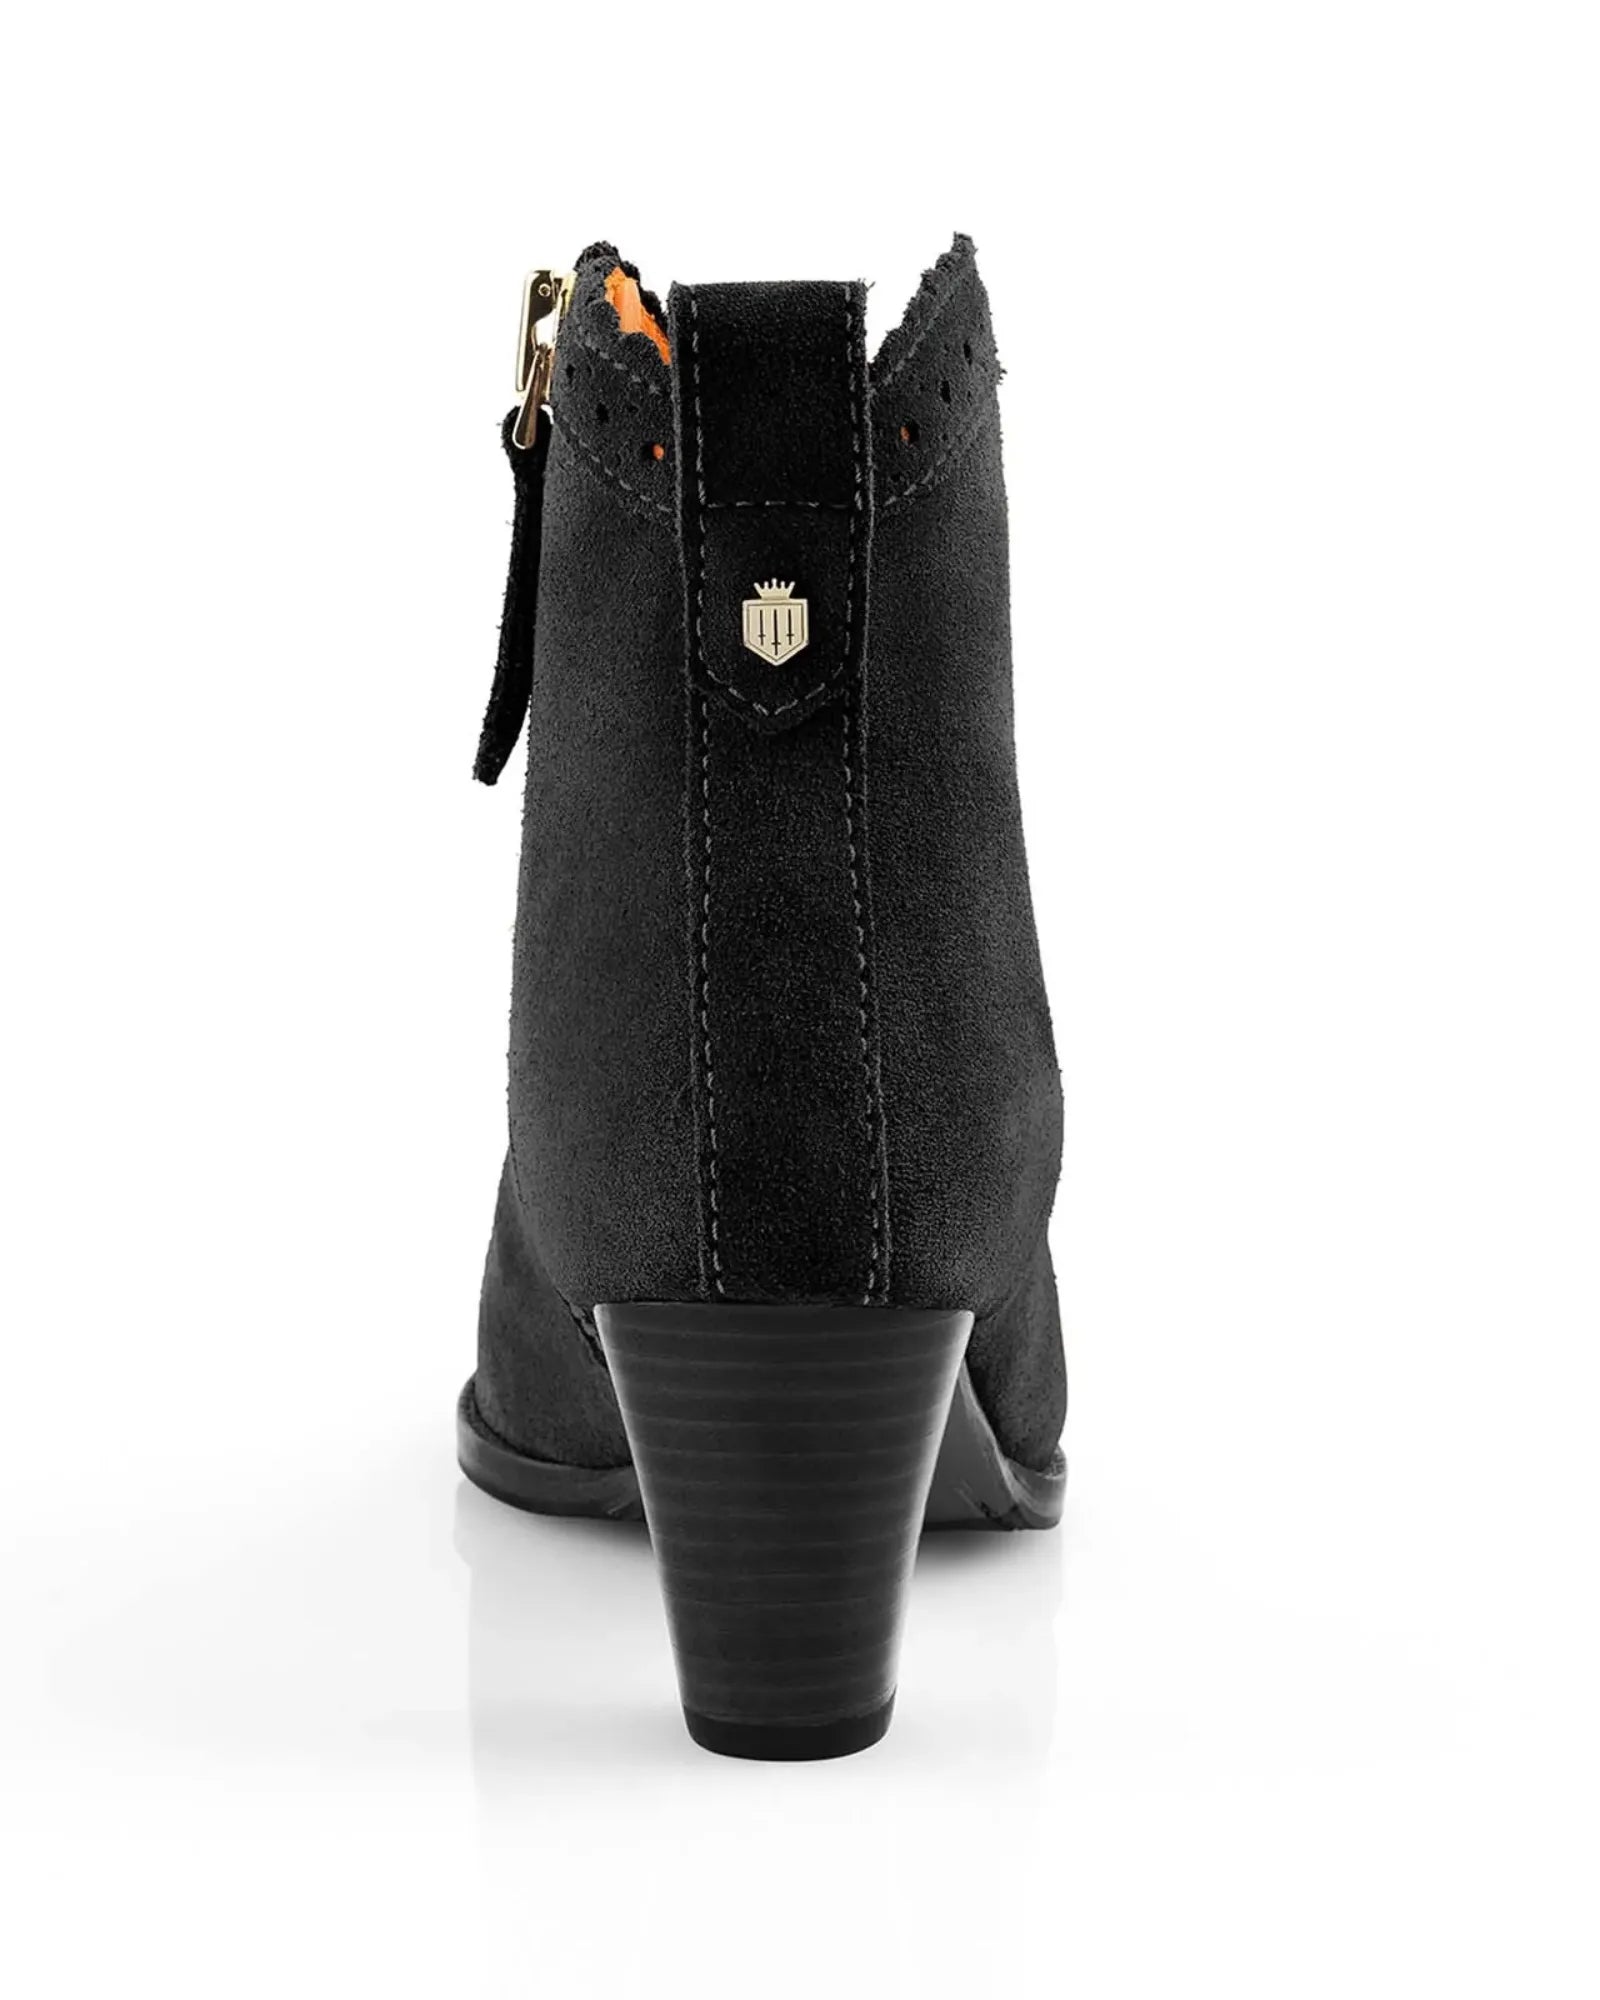 The Regina Ankle Boot in Black Suede